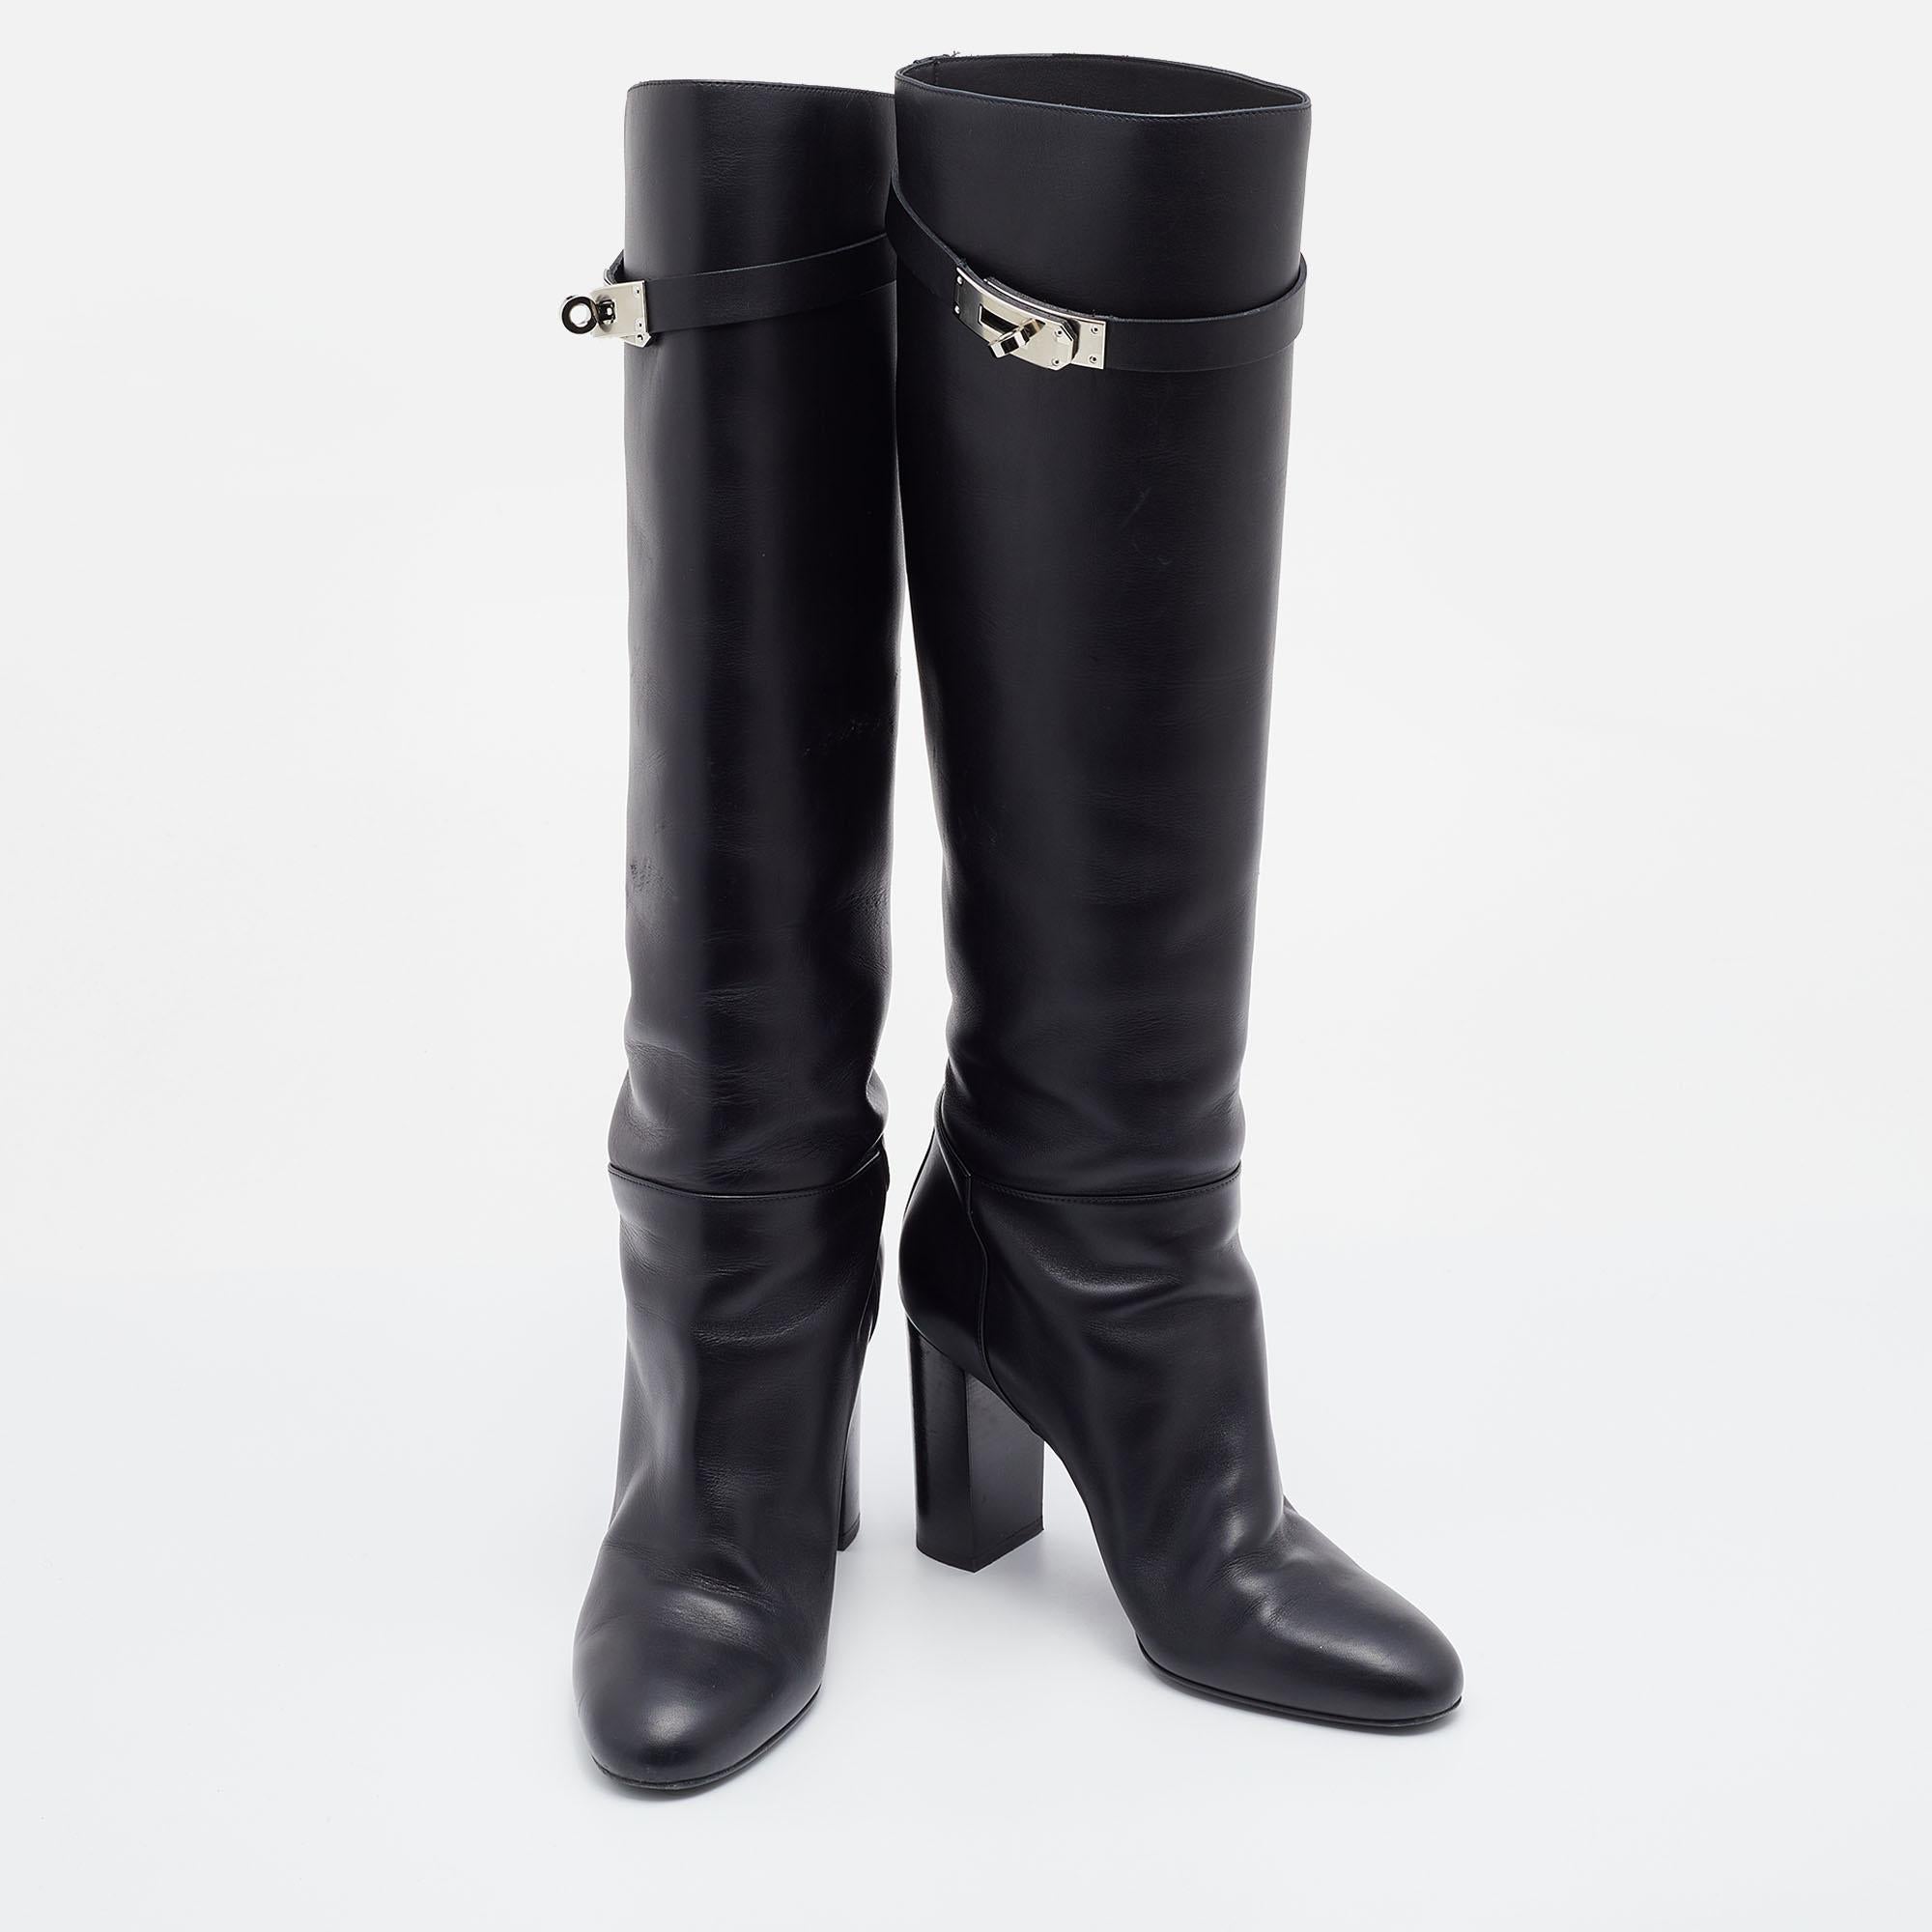 Hermes Black Leather Story Knee Length Boots Size 37.5 1